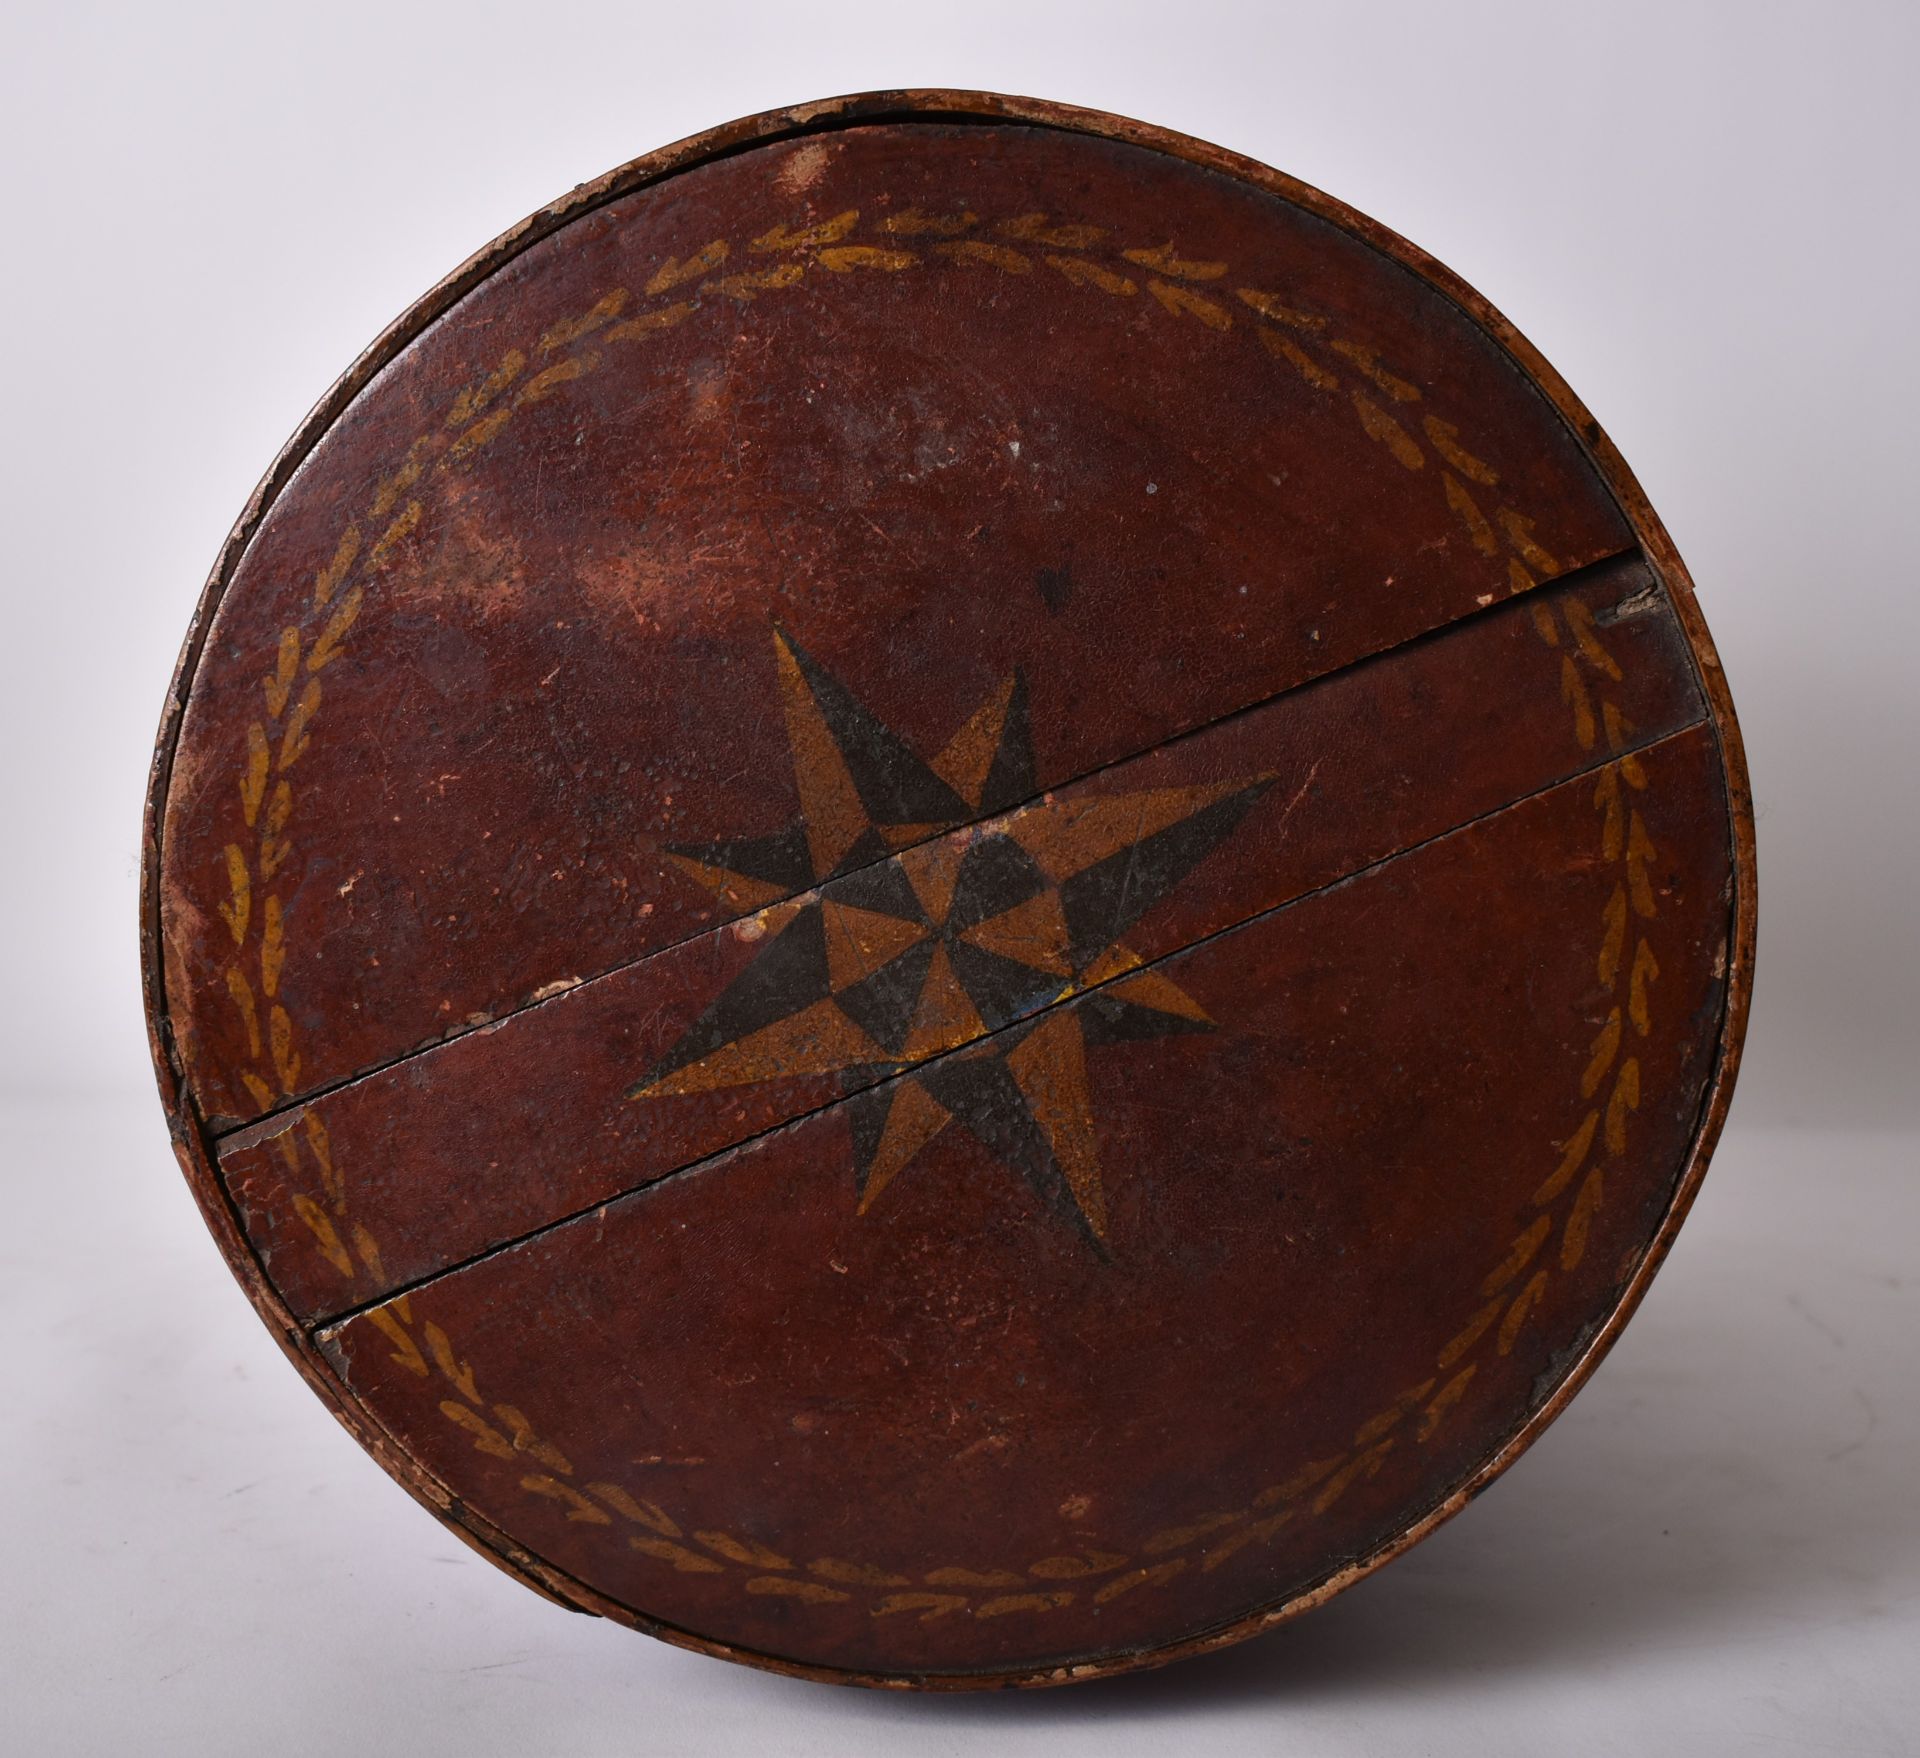 LARGE 19TH CENTURY SHIPPING SPICE BARREL WITH LID - Image 5 of 6